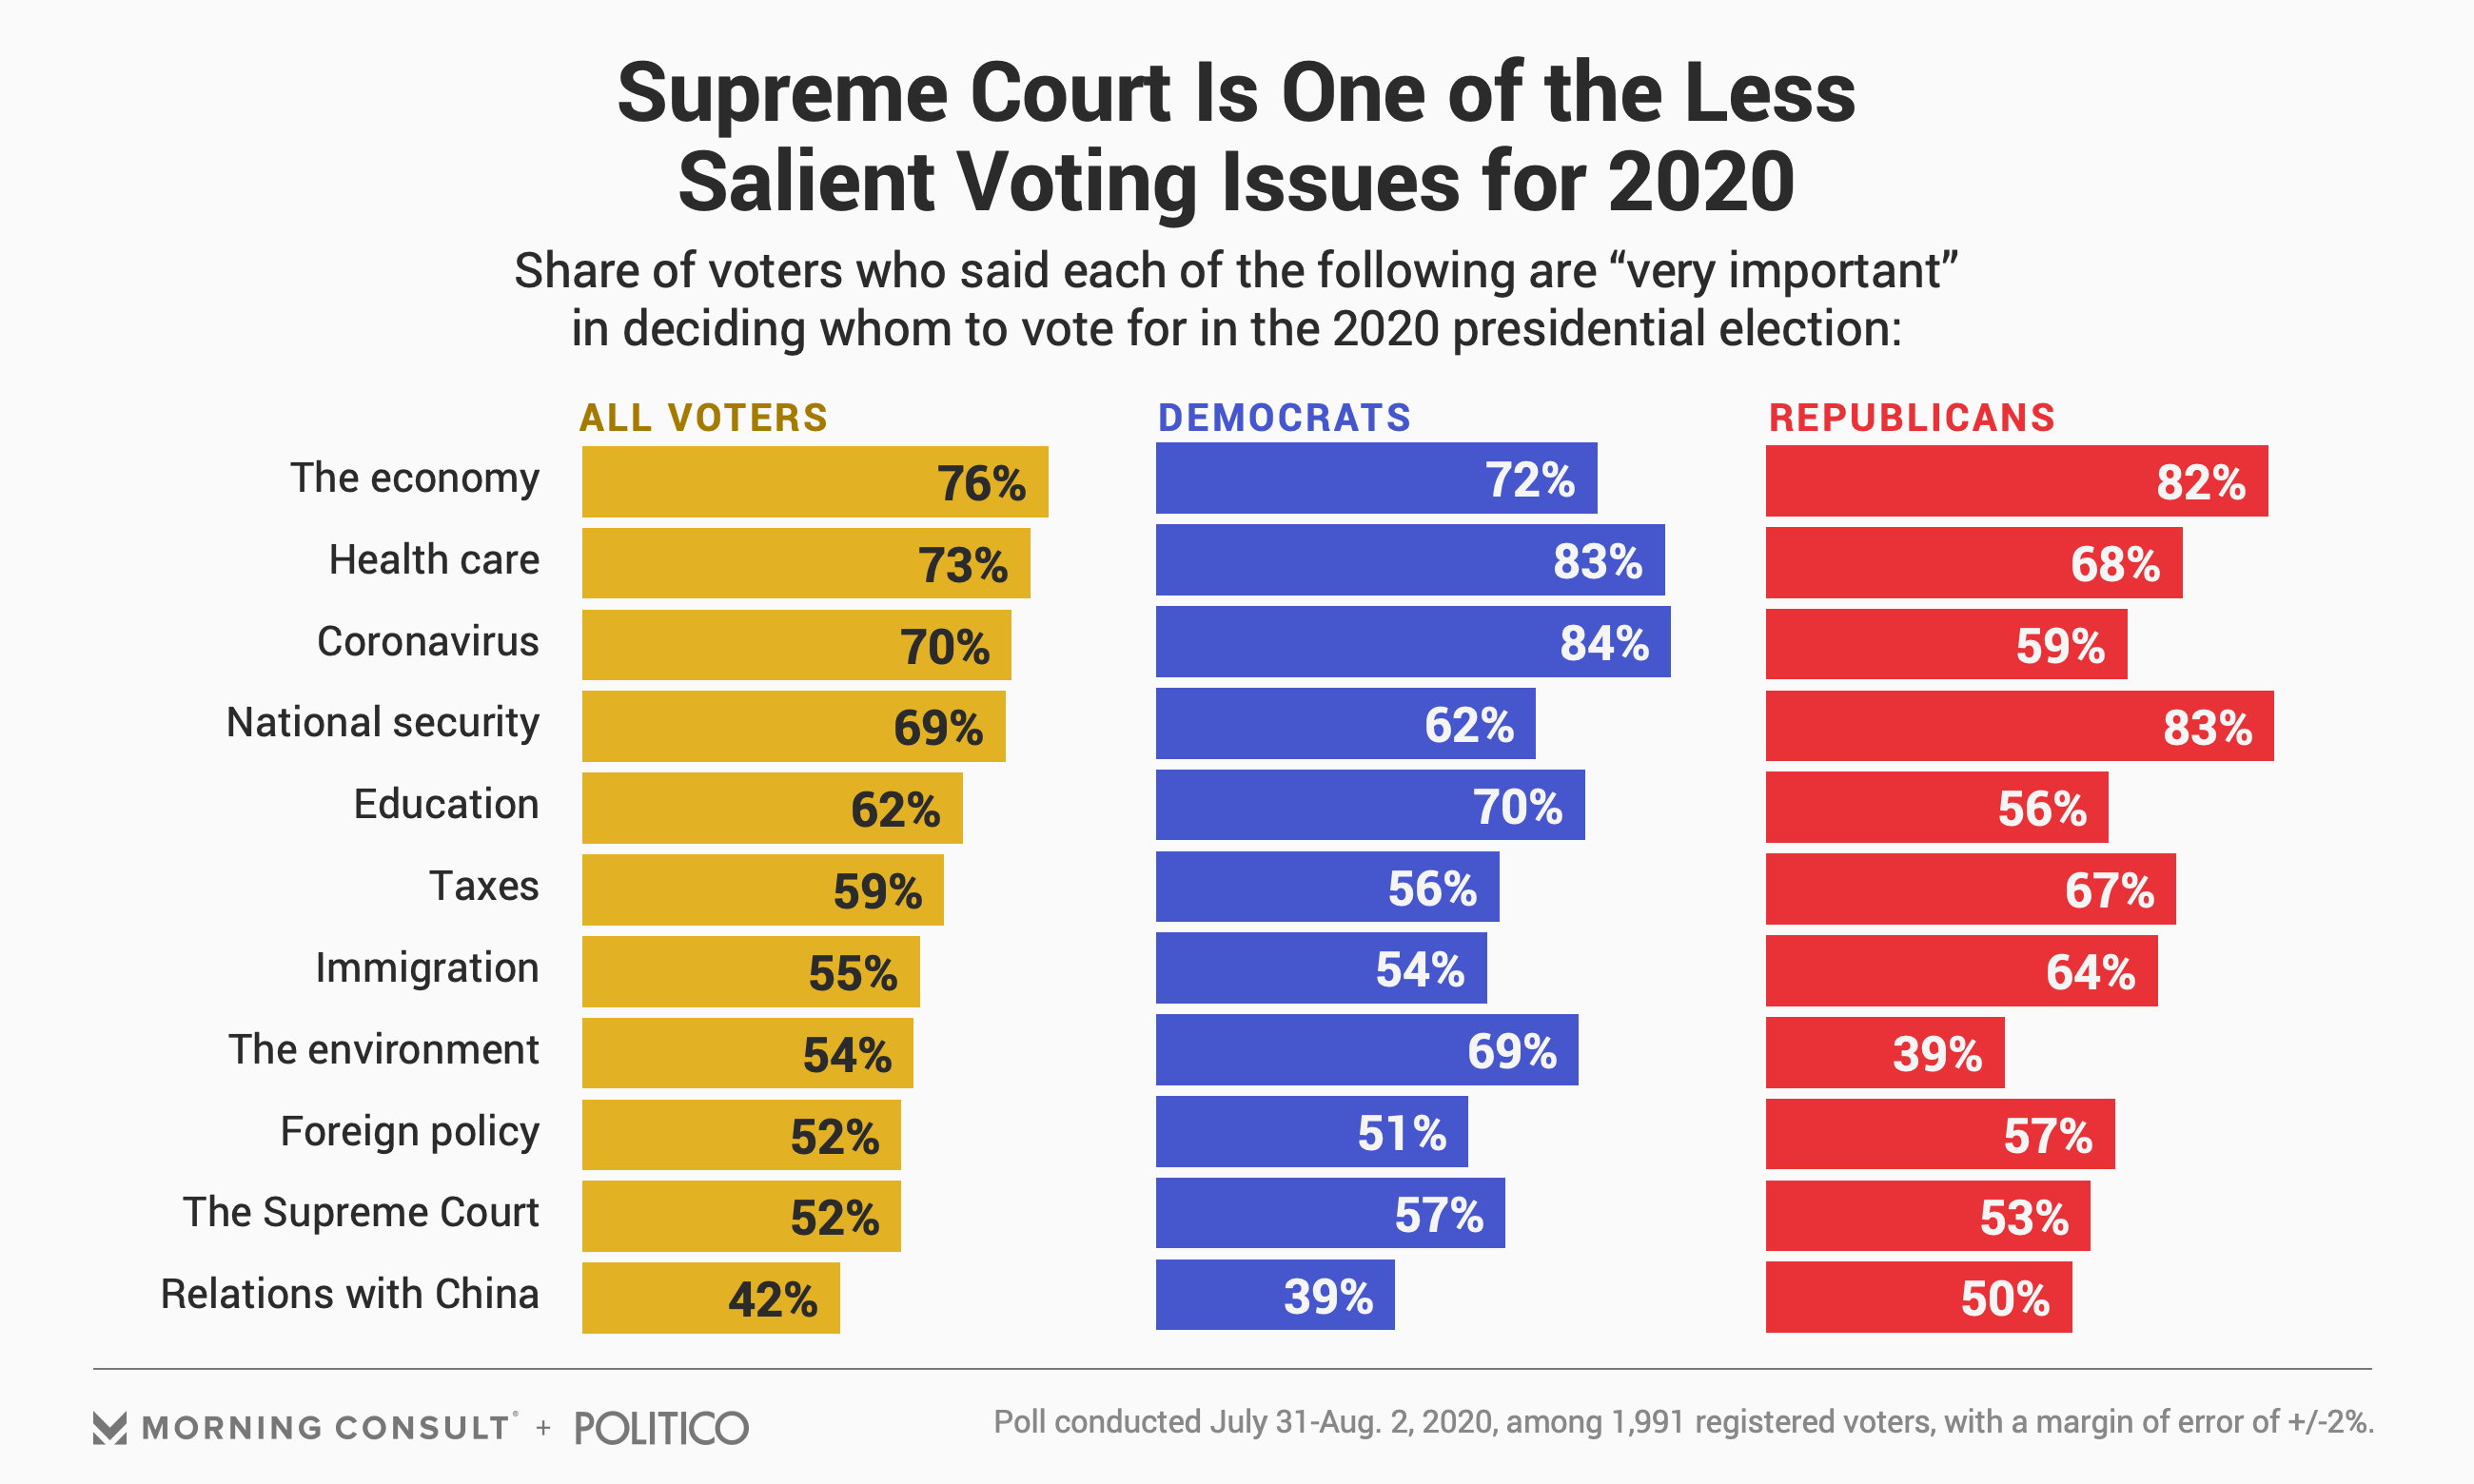 The Supreme Court Is More Important for Democratic Voters